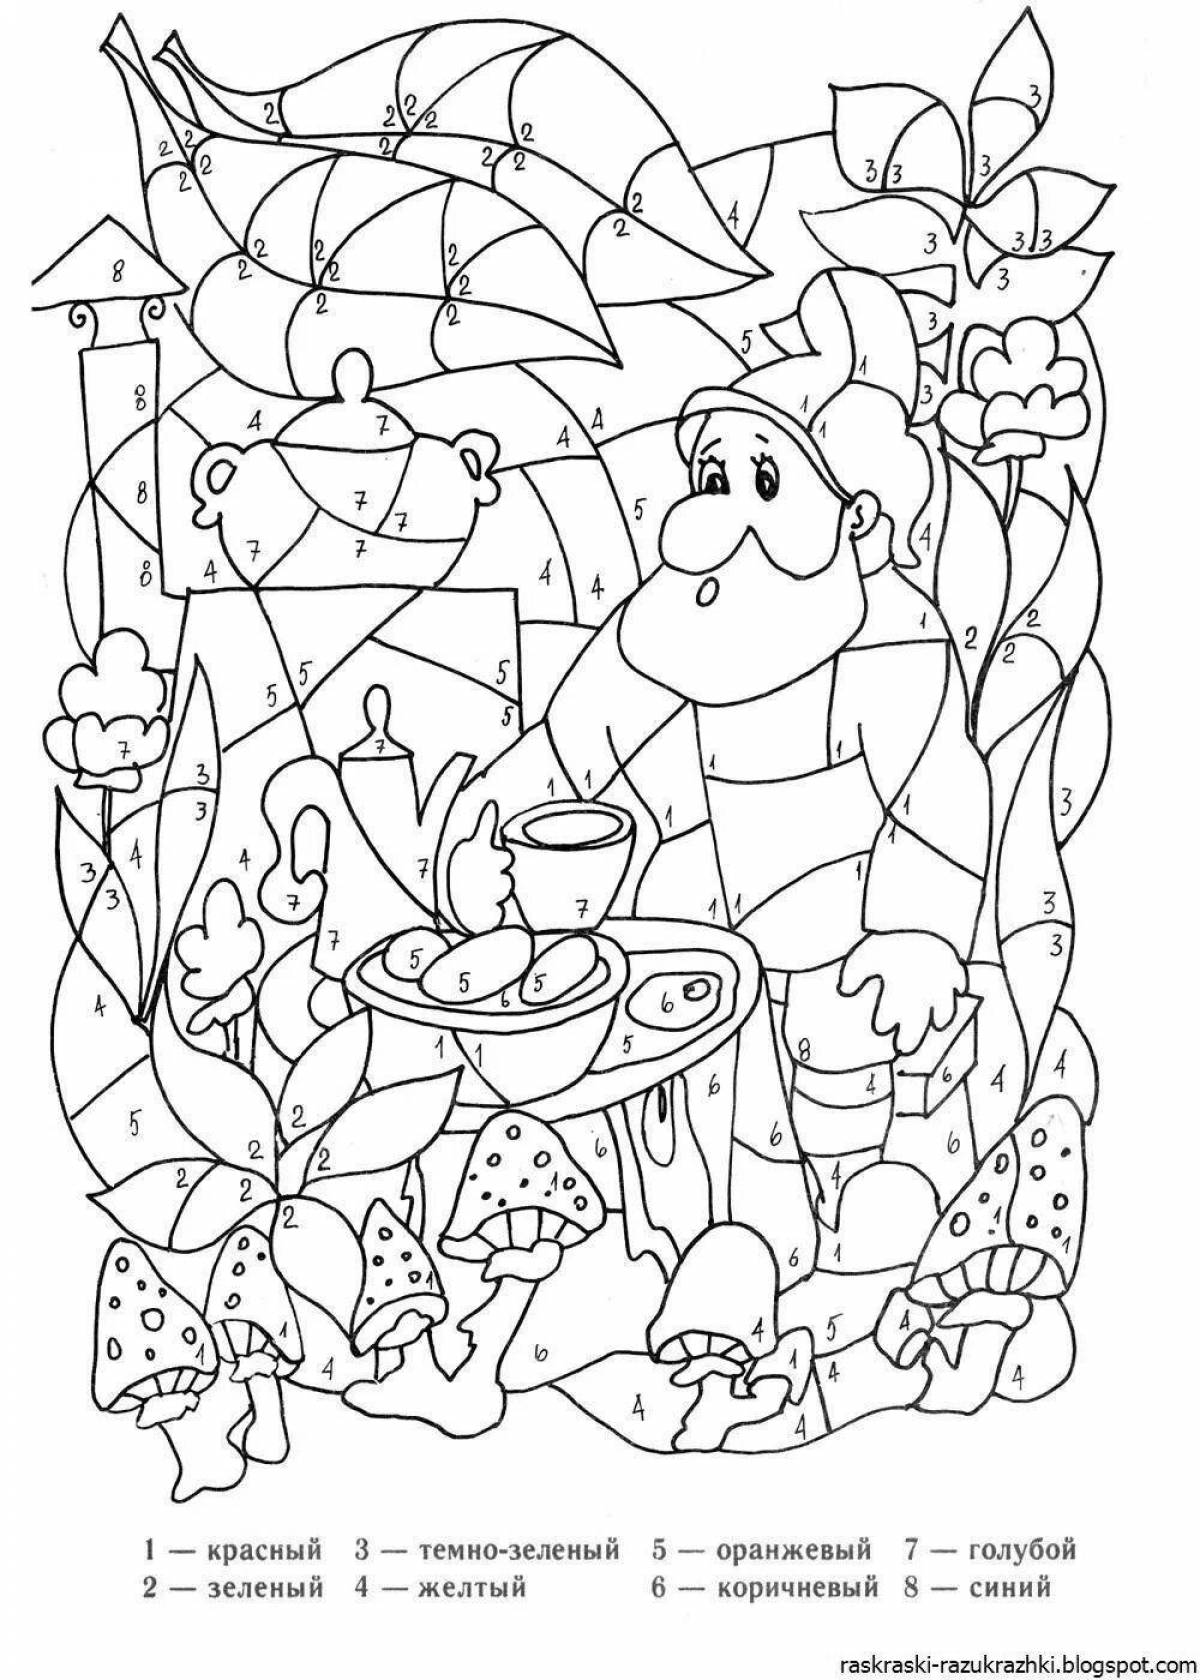 Fun coloring book for 7-9 year olds